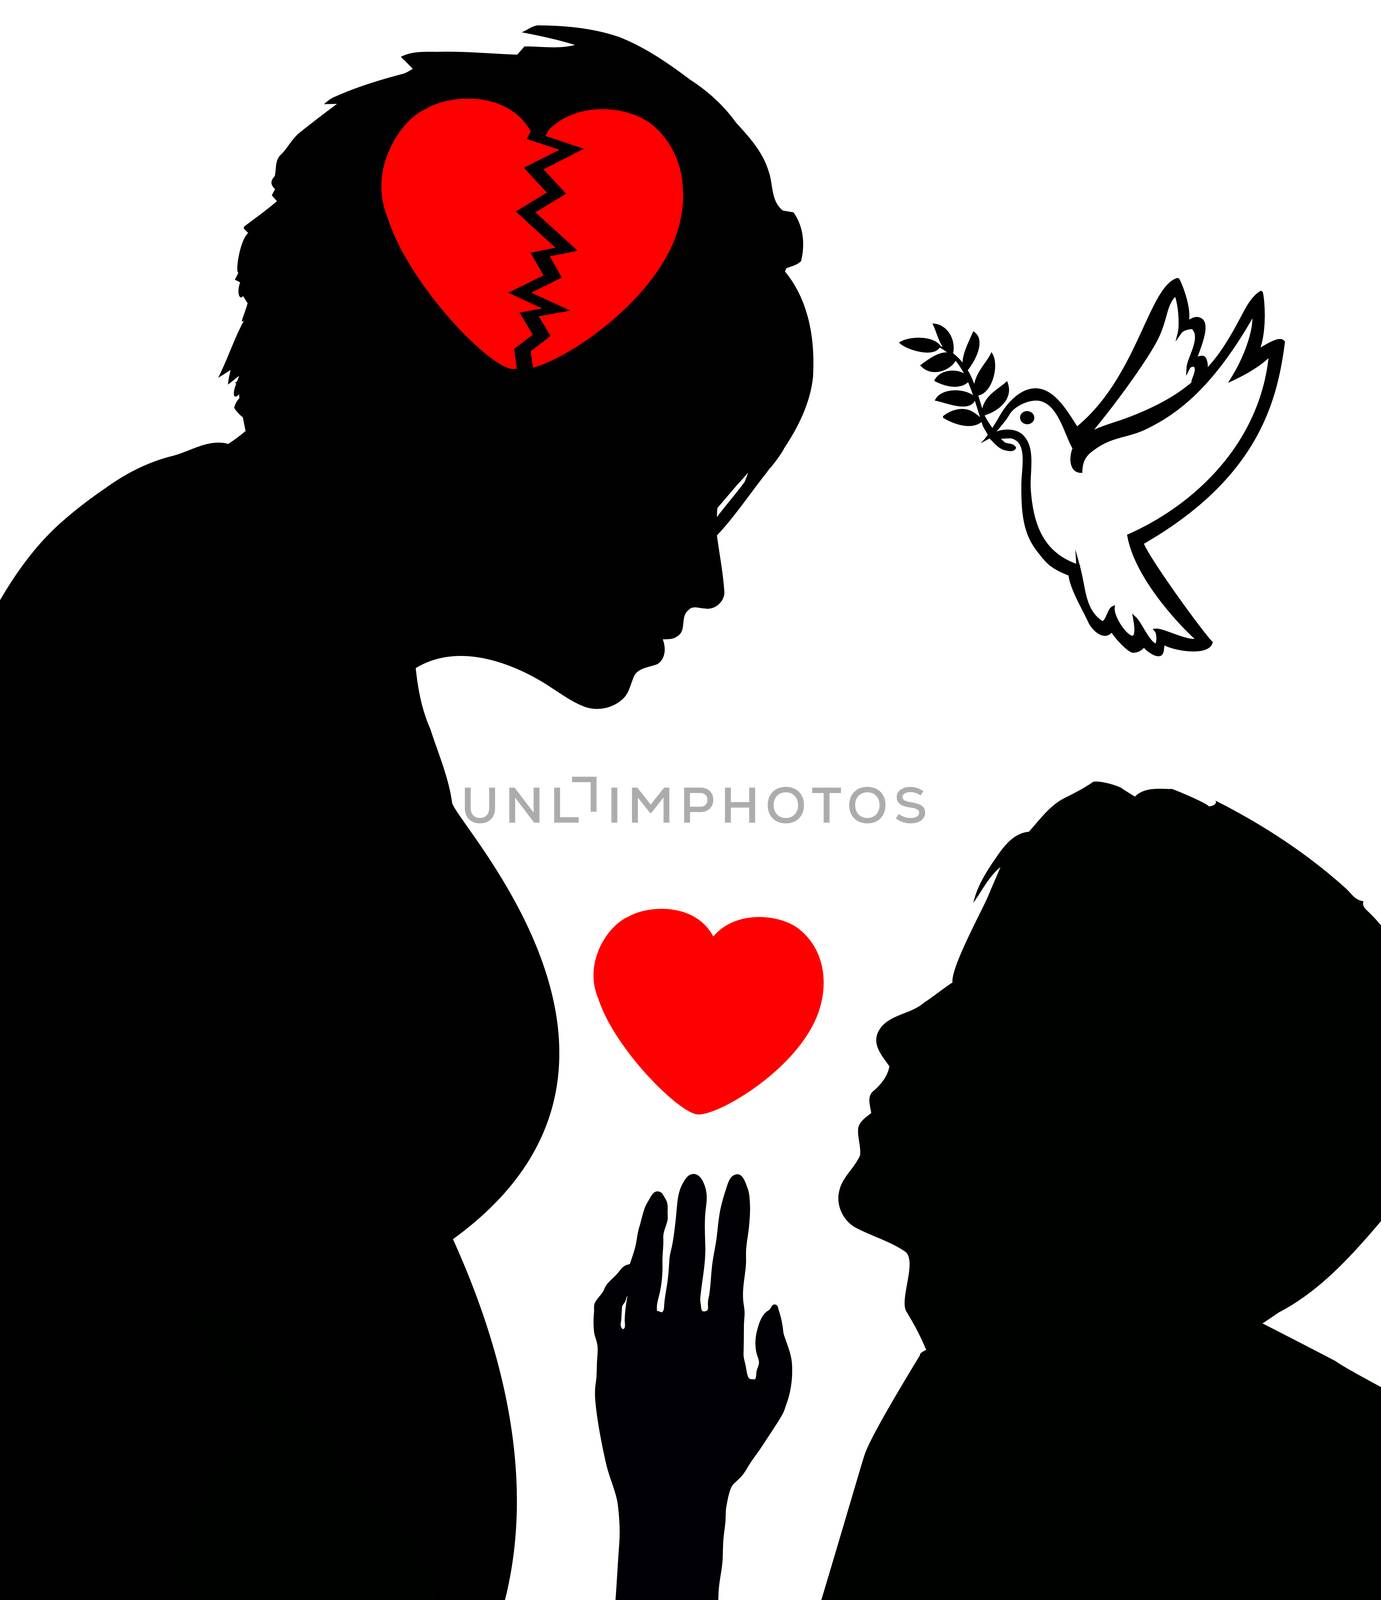 Concept illustration of marriage conciliation to fix broken hearts